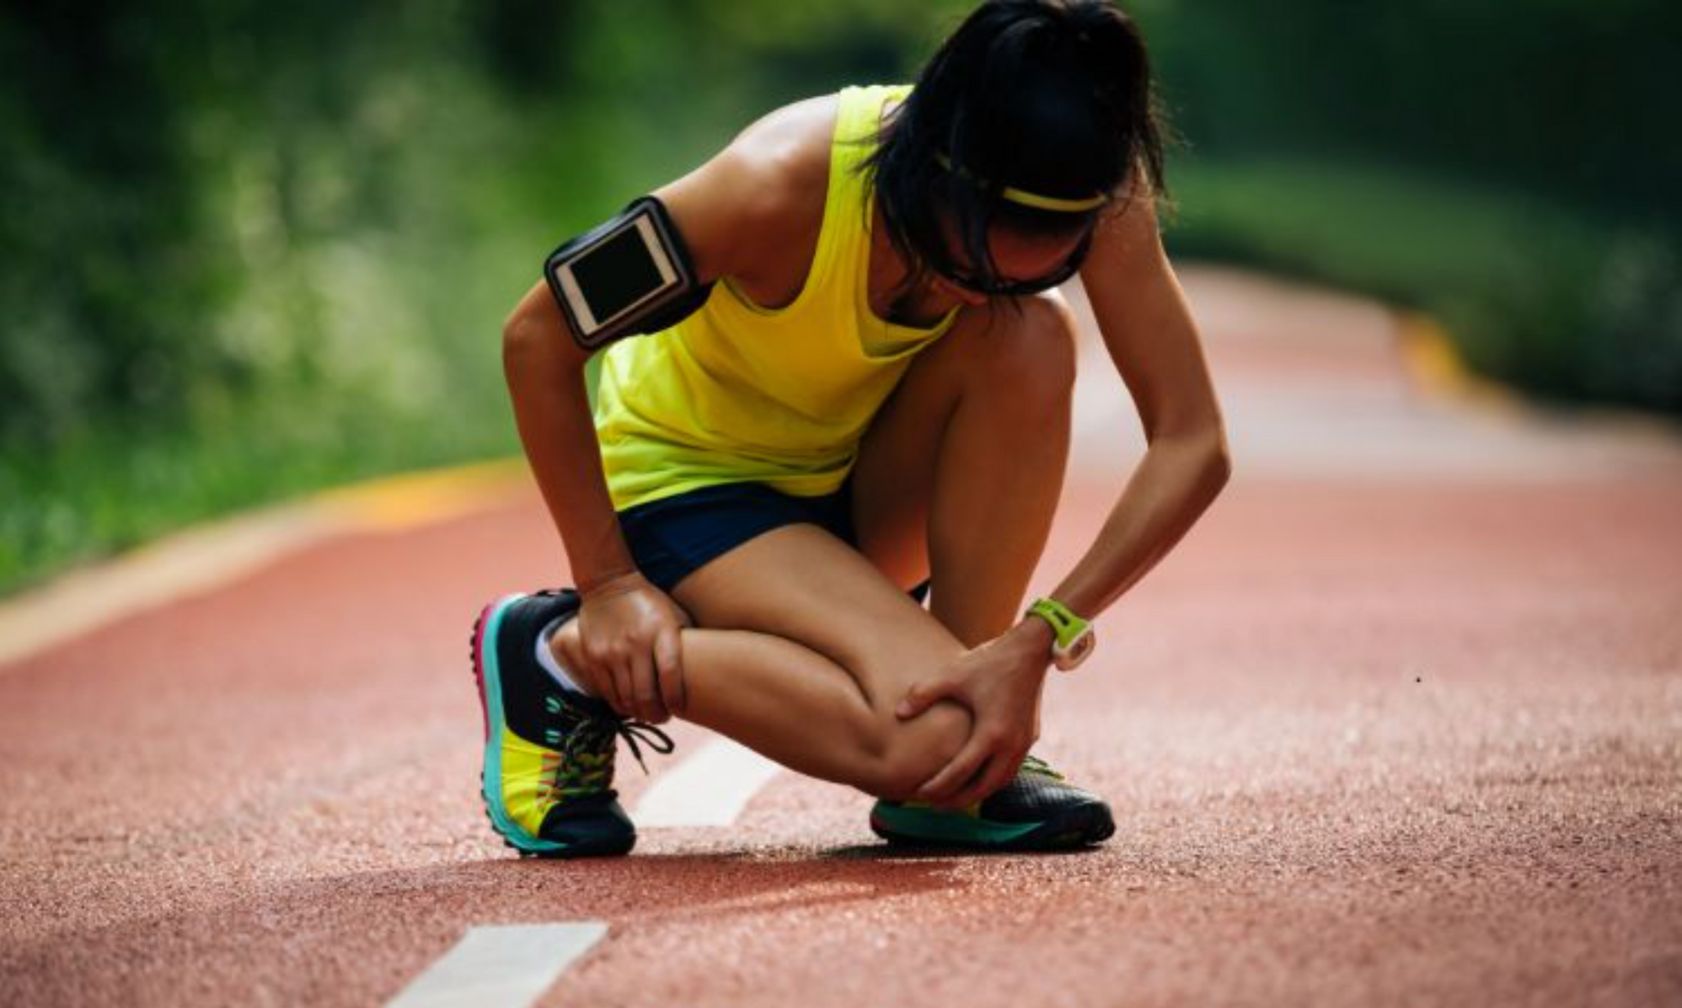 woman overextended during running